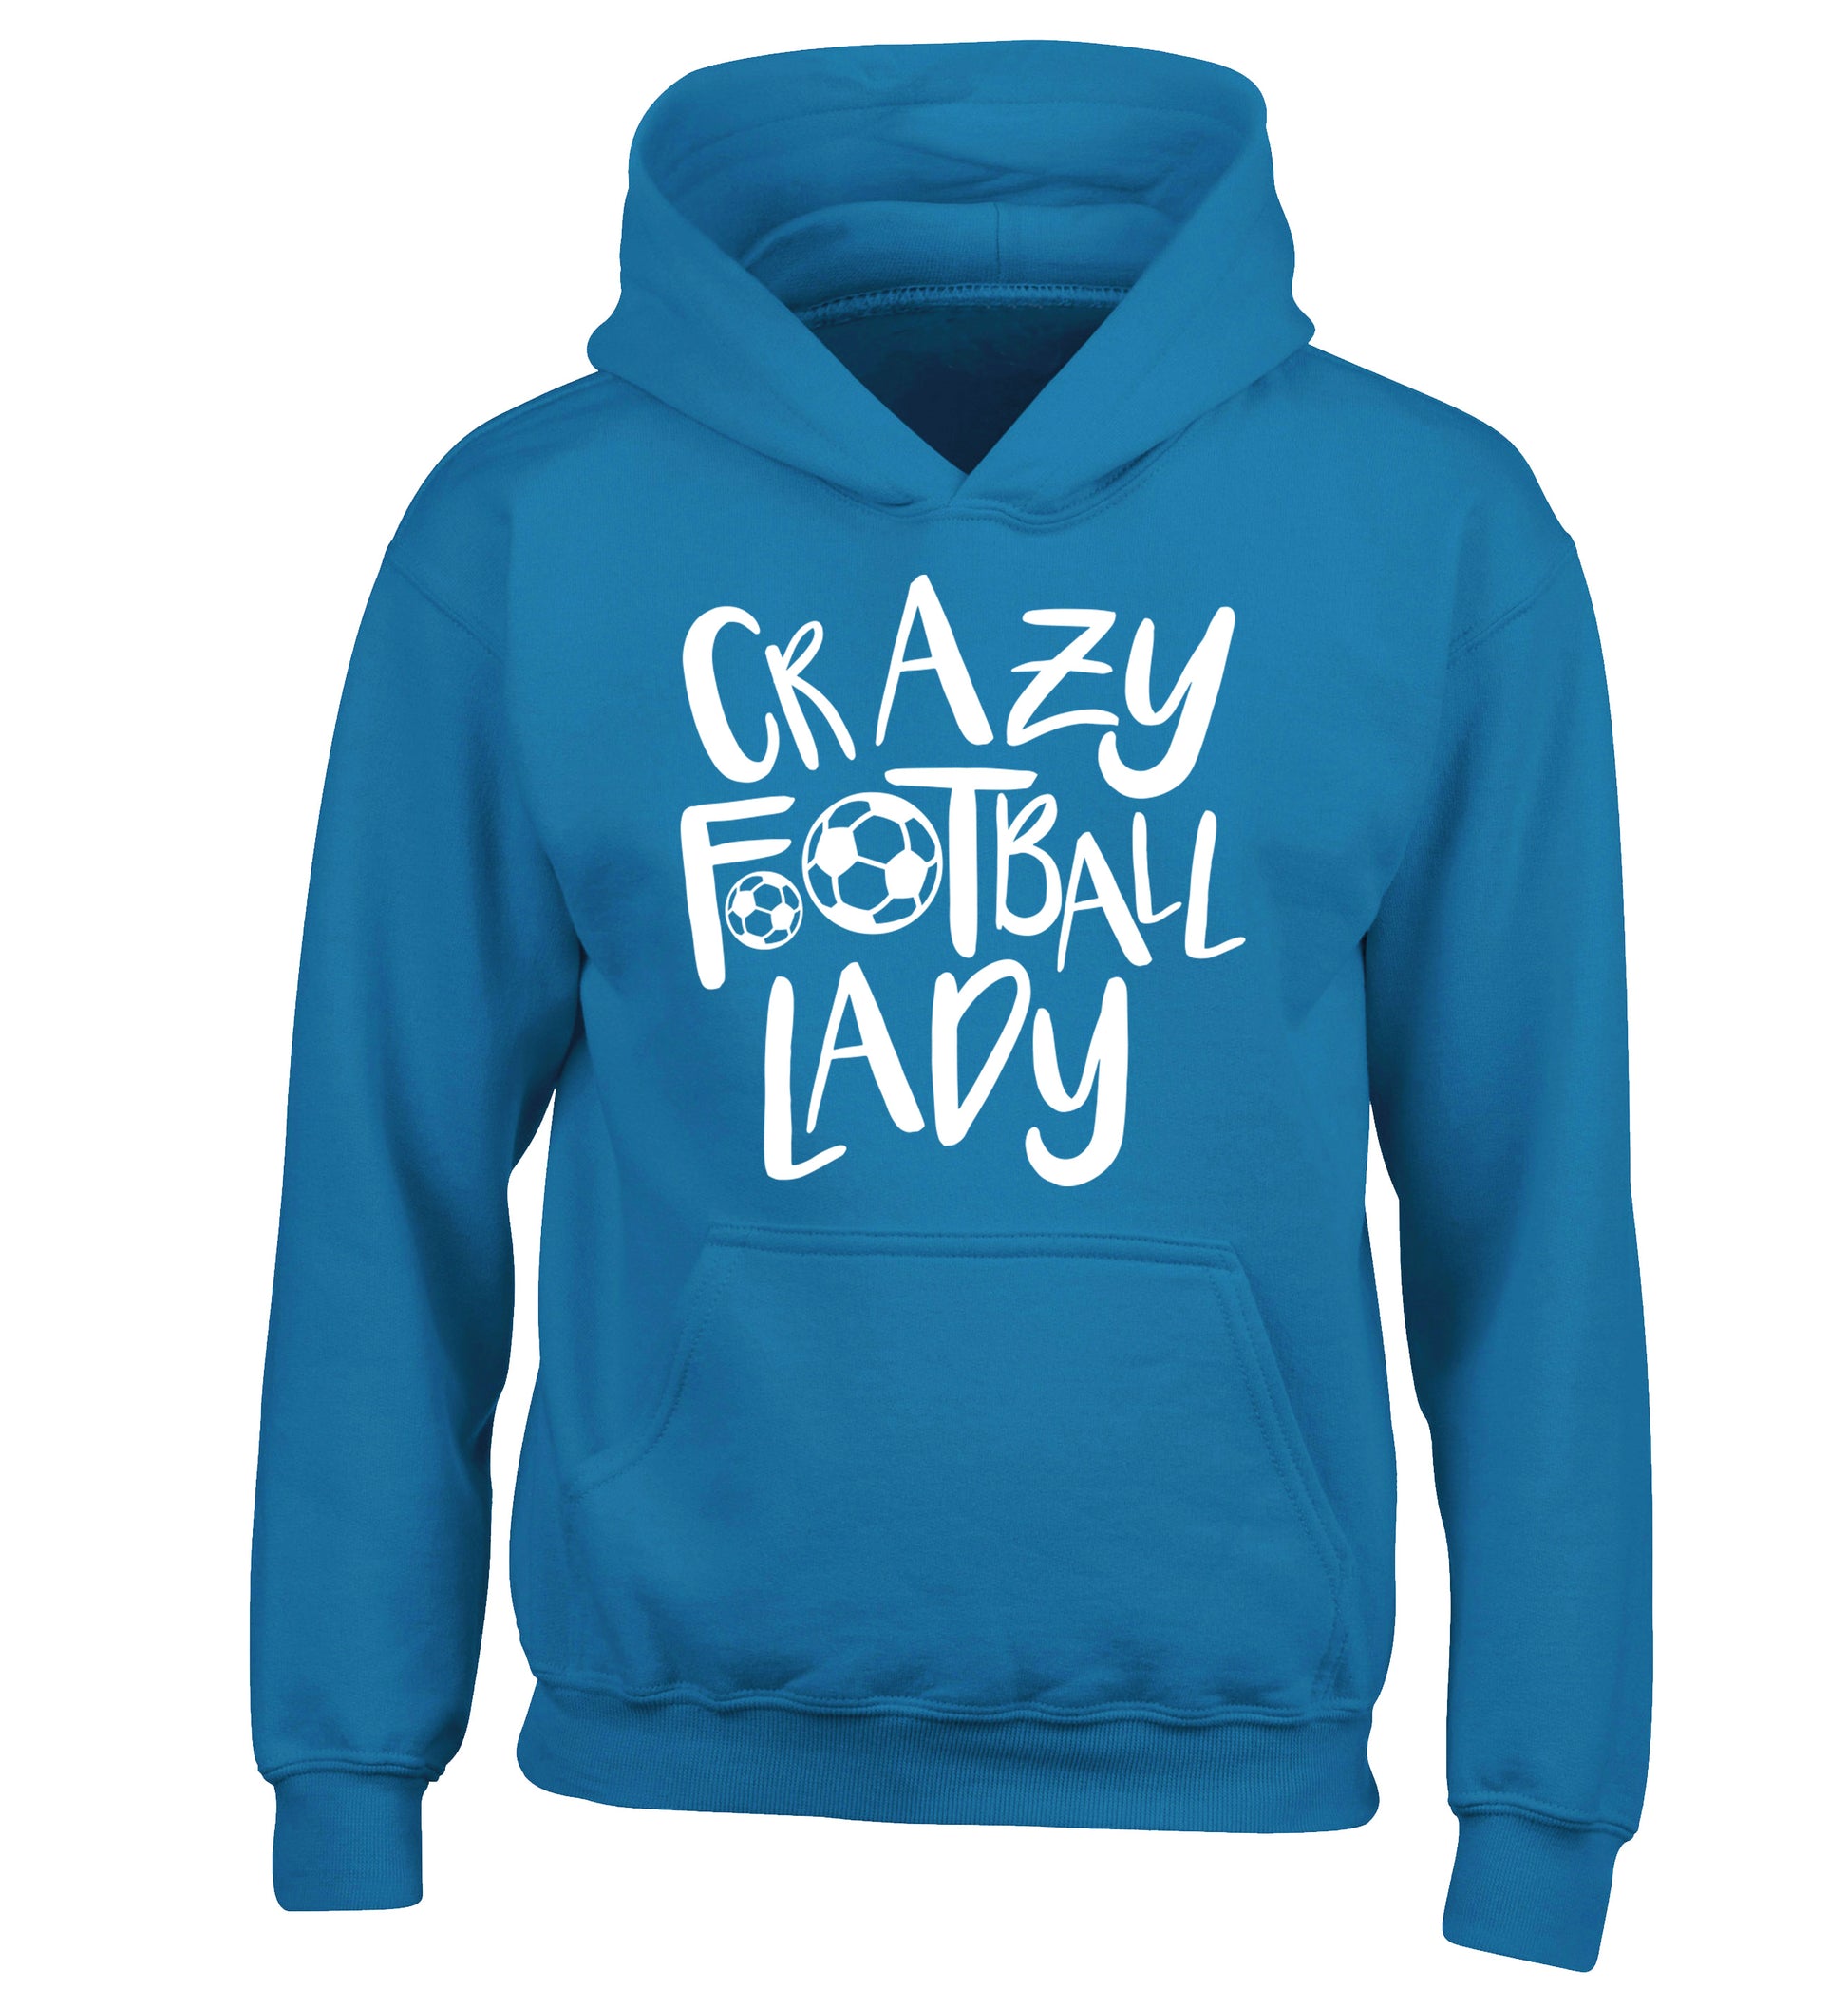 Crazy football lady children's blue hoodie 12-14 Years